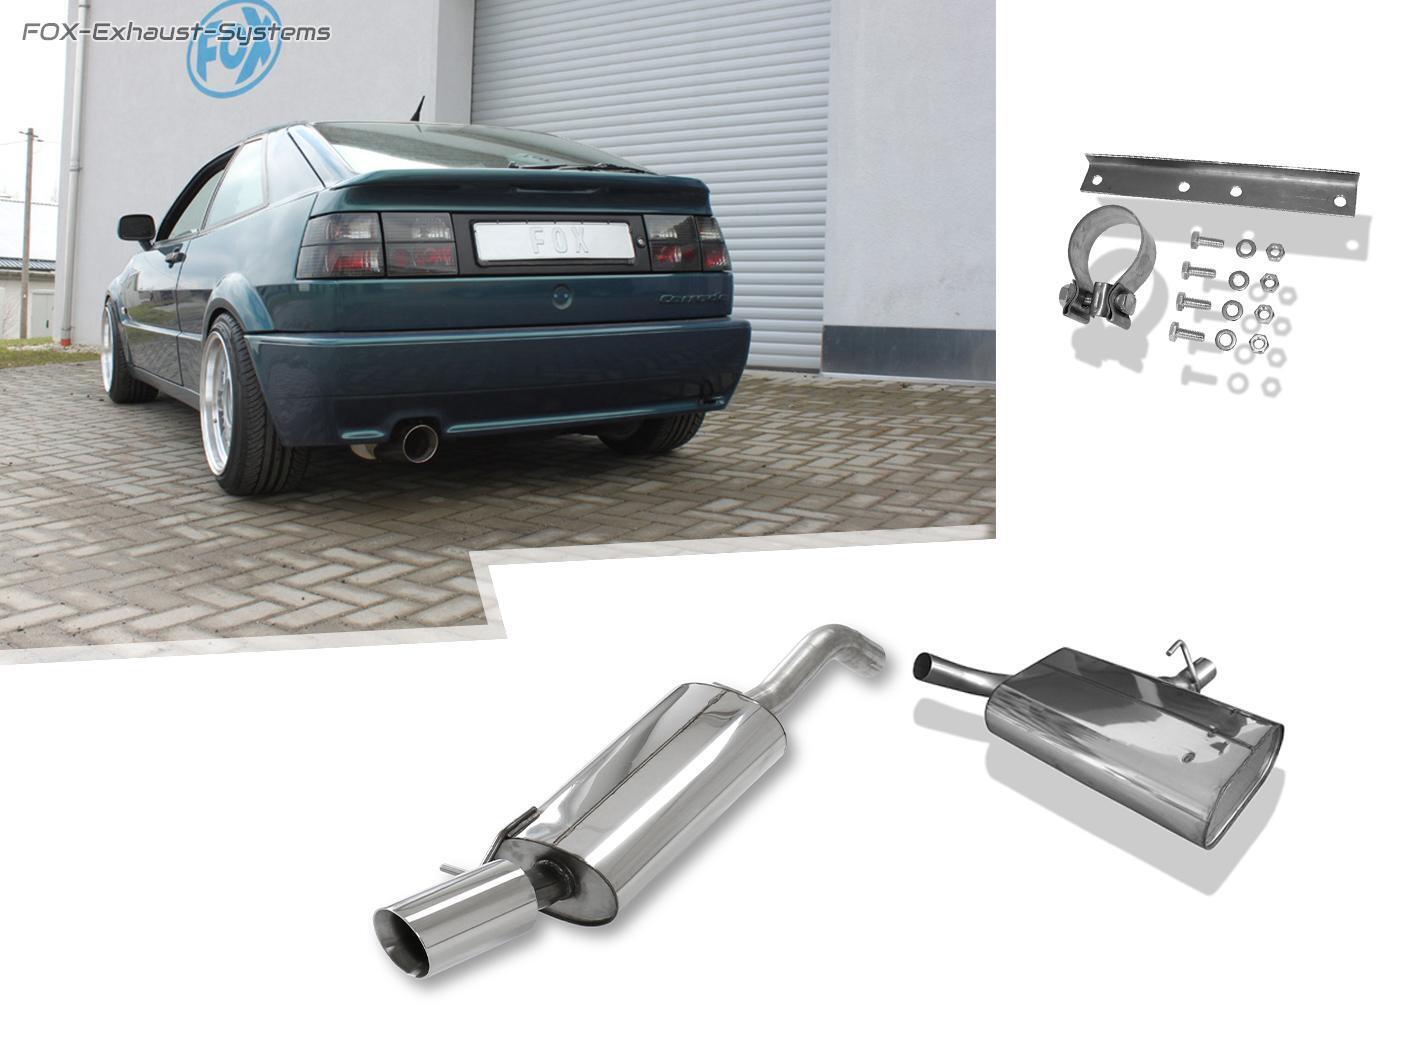 Stainless Steel Sports Exhaust System From Vsd VW Corrado 2.0 100mm Round